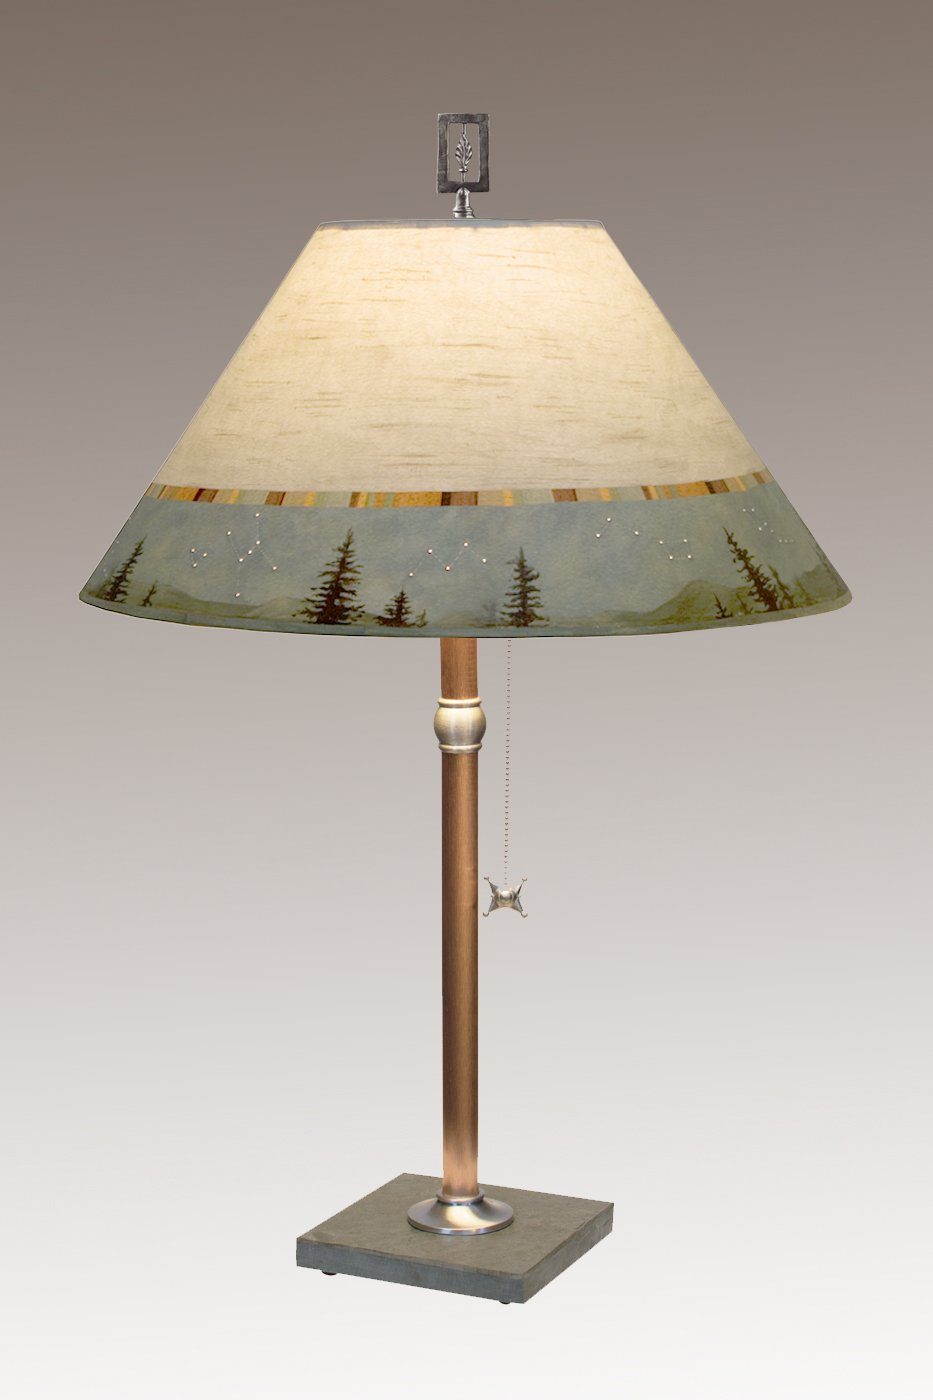 Janna Ugone &amp; Co Table Lamps Copper Table Lamp with Large Conical Shade in Birch Midnight